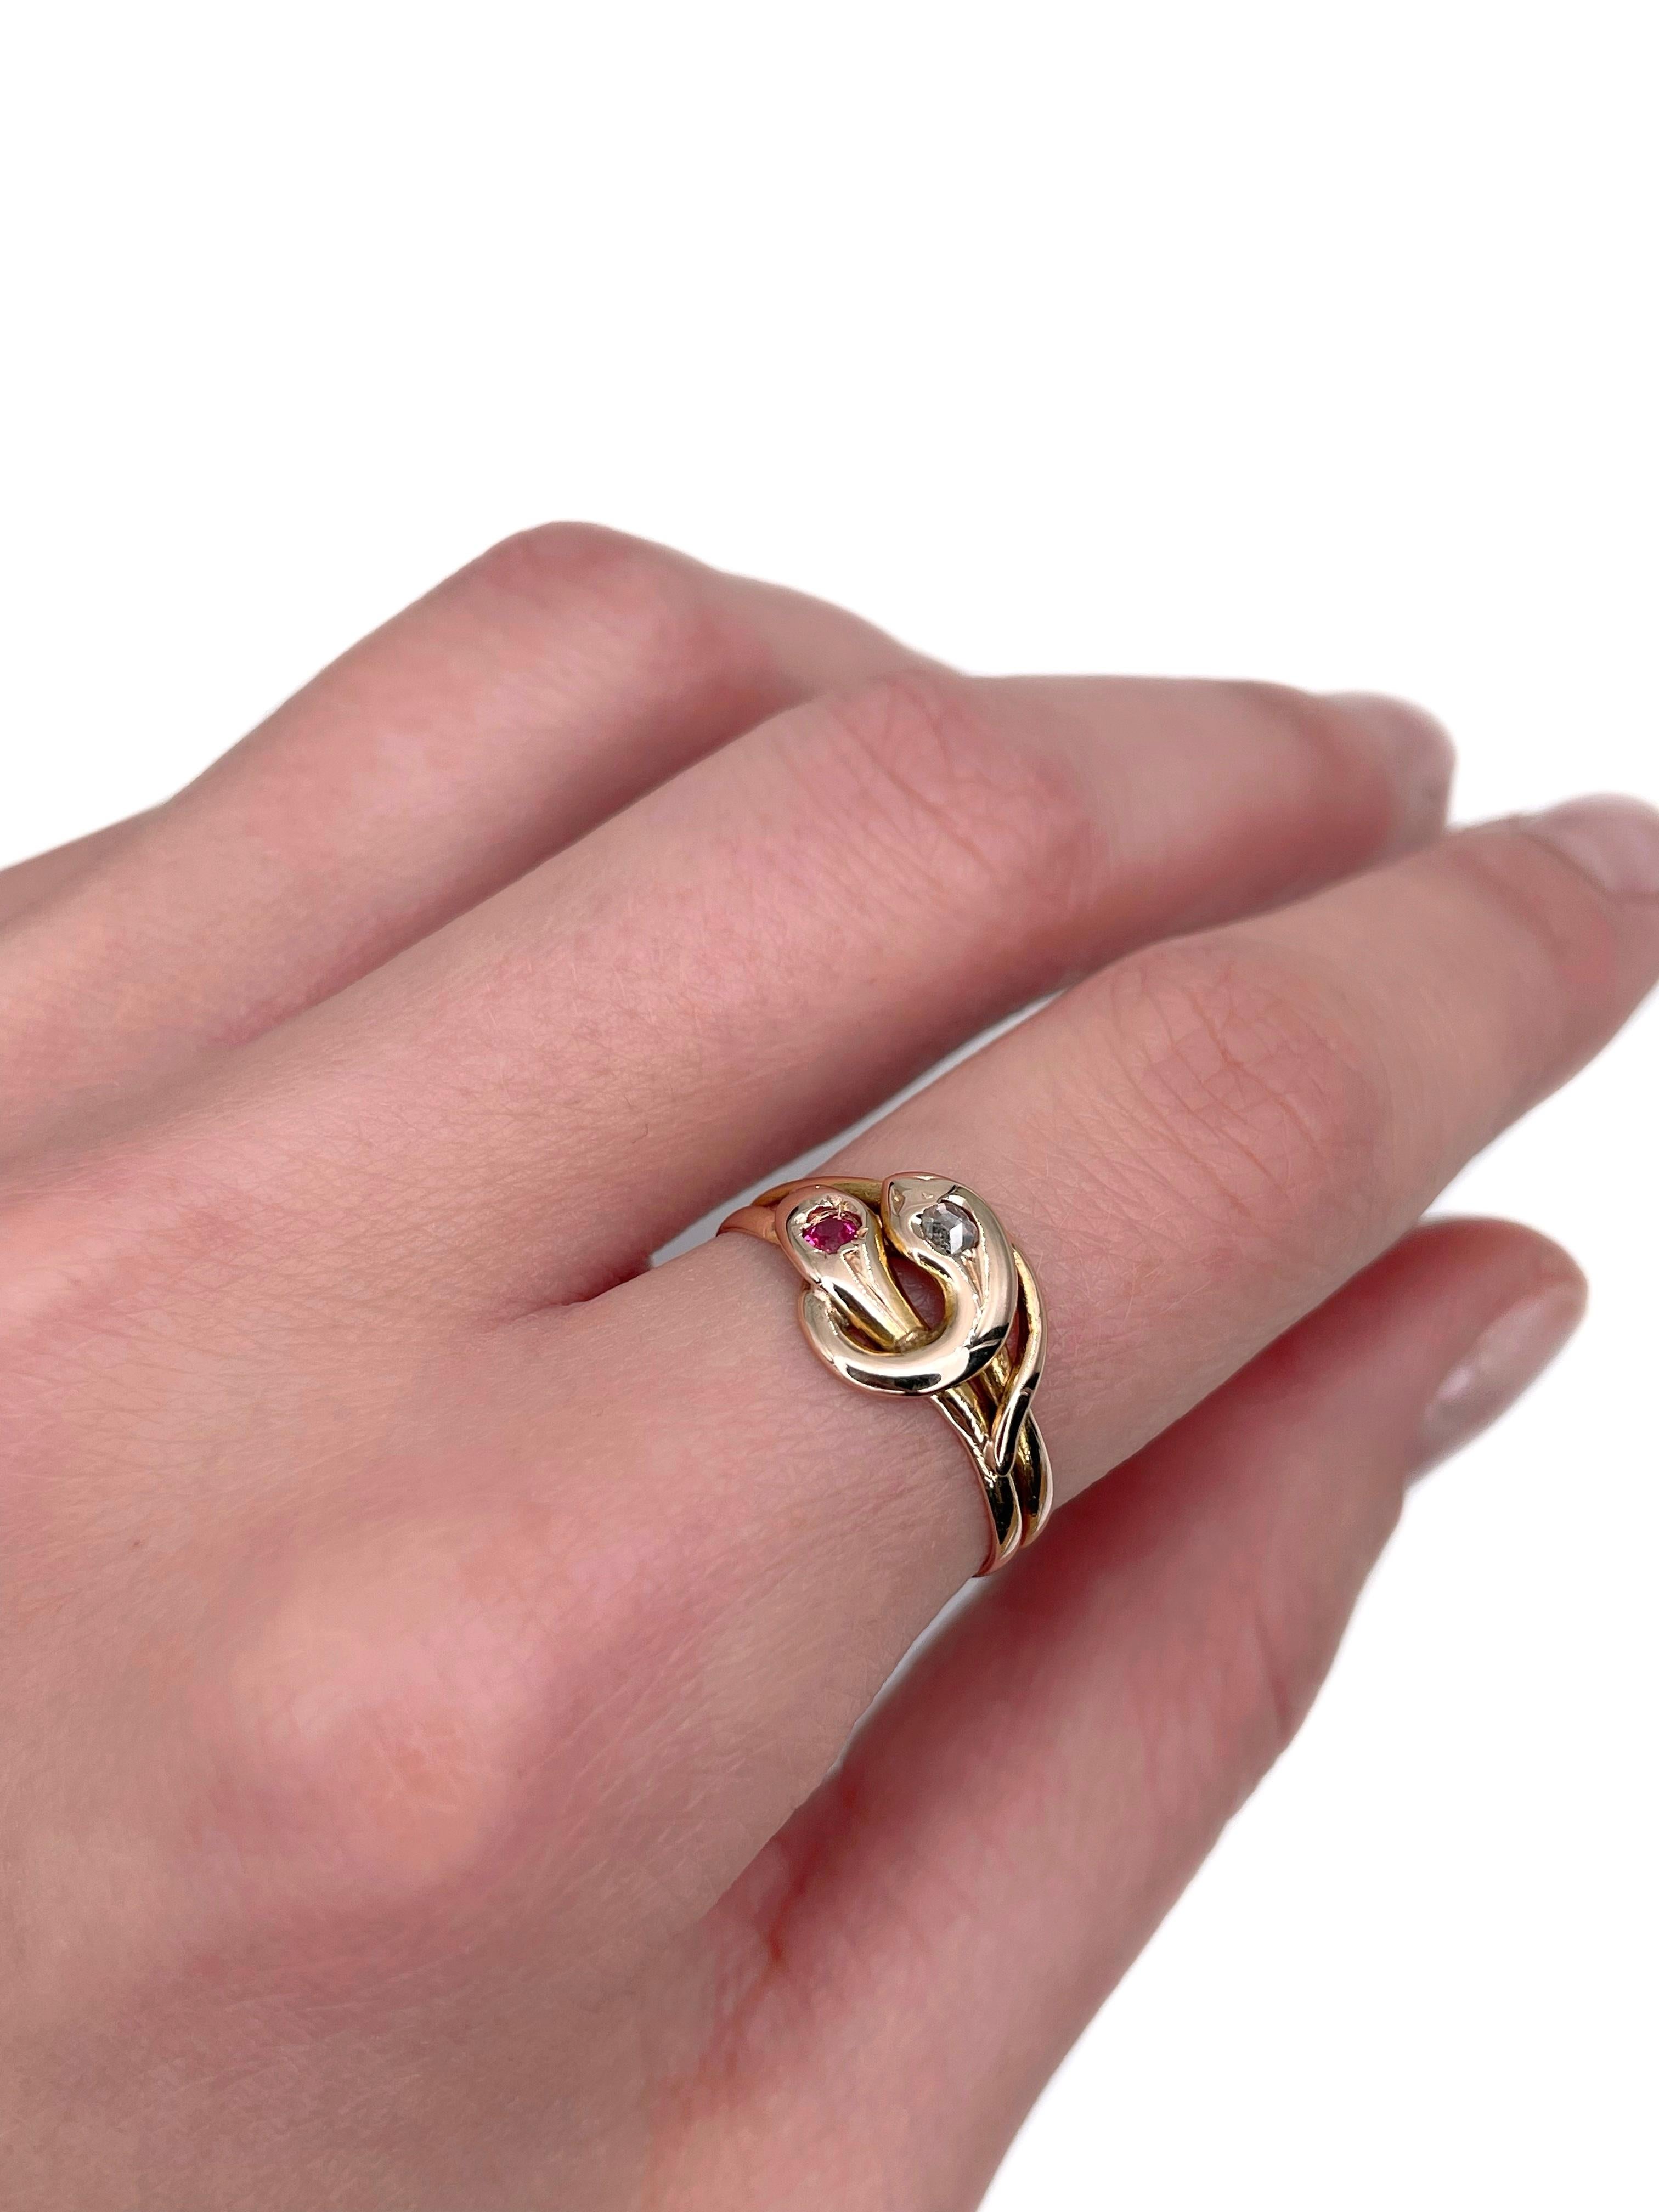 This is a lovely Victorian double snake ring crafted in 18K slightly yellow gold. Circa 1890. The piece features rose cut diamond.

Weight: 2.38g
Size: 17.5 (US 7)

IMPORTANT: please ask about the possibility to resize before purchase. This process